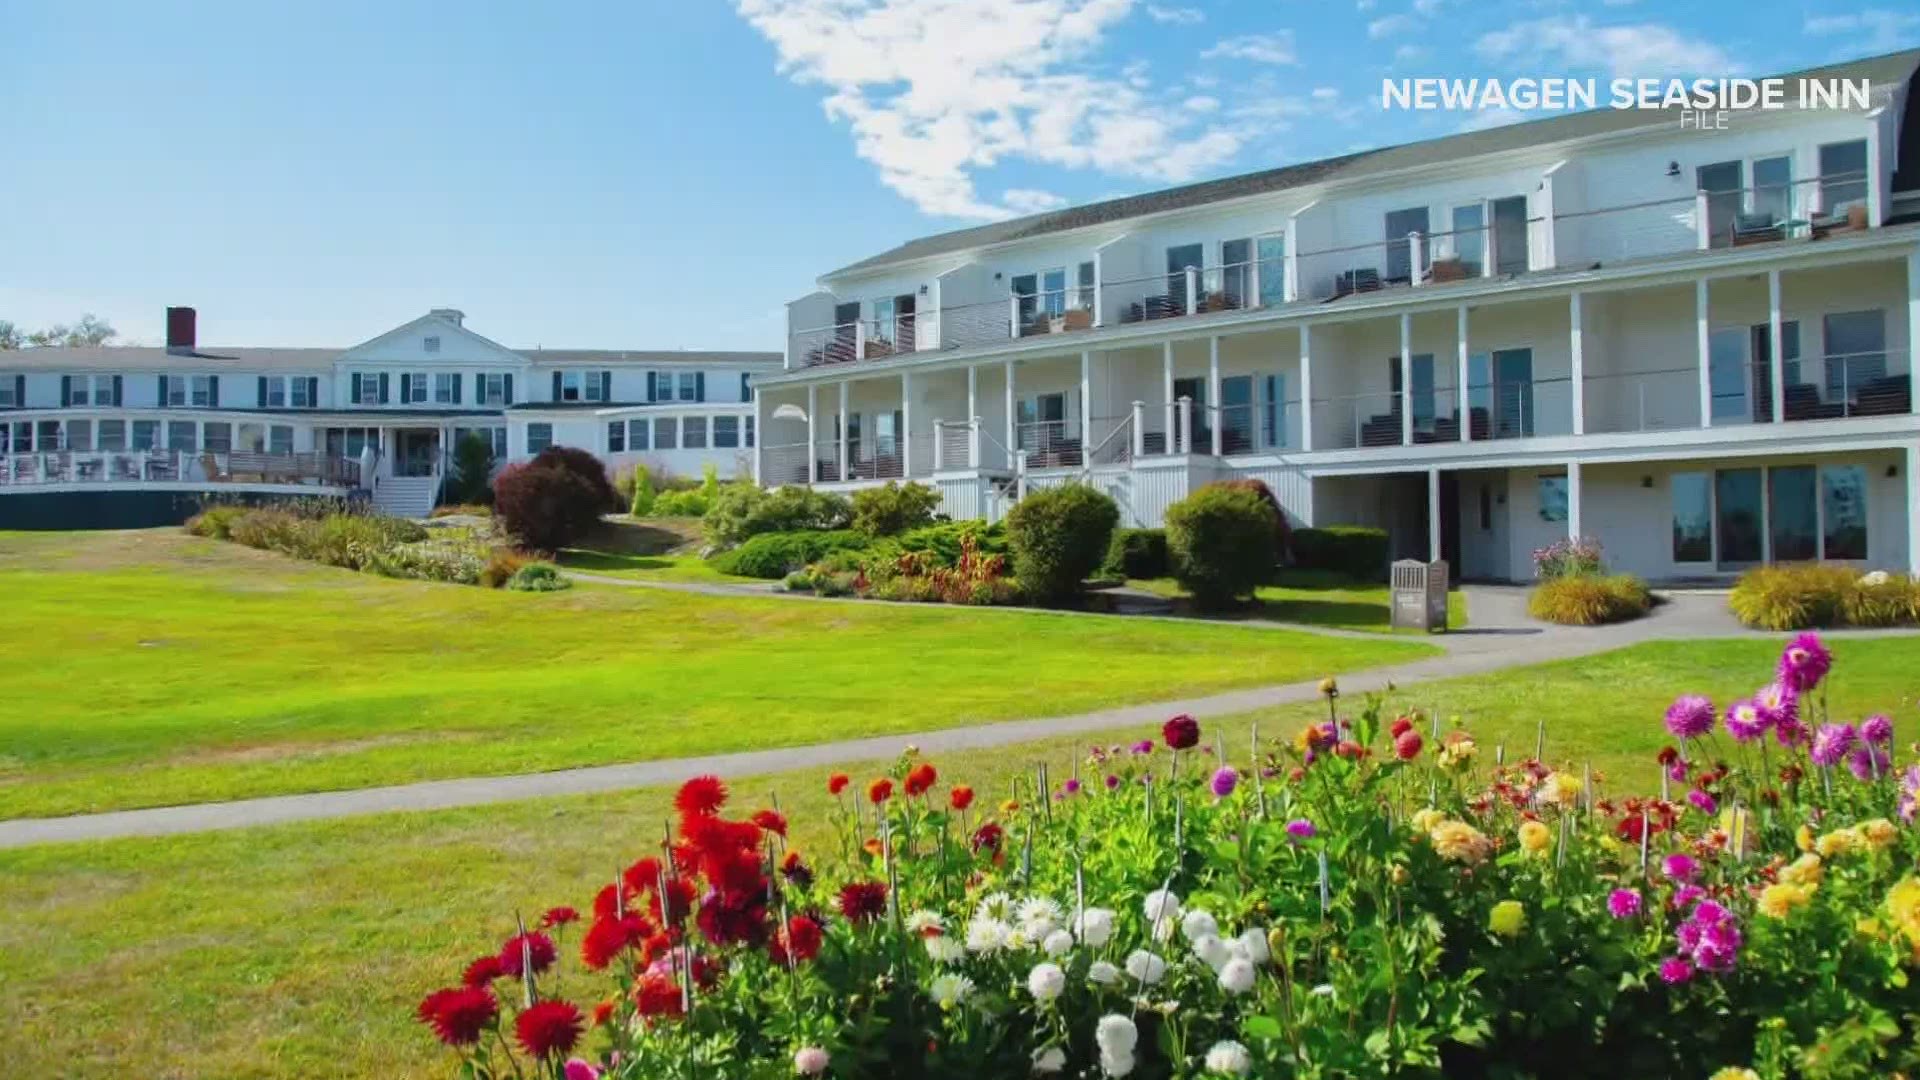 Maine lodging businesses can begin accepting out-of-state reservations for June 1 and beyond